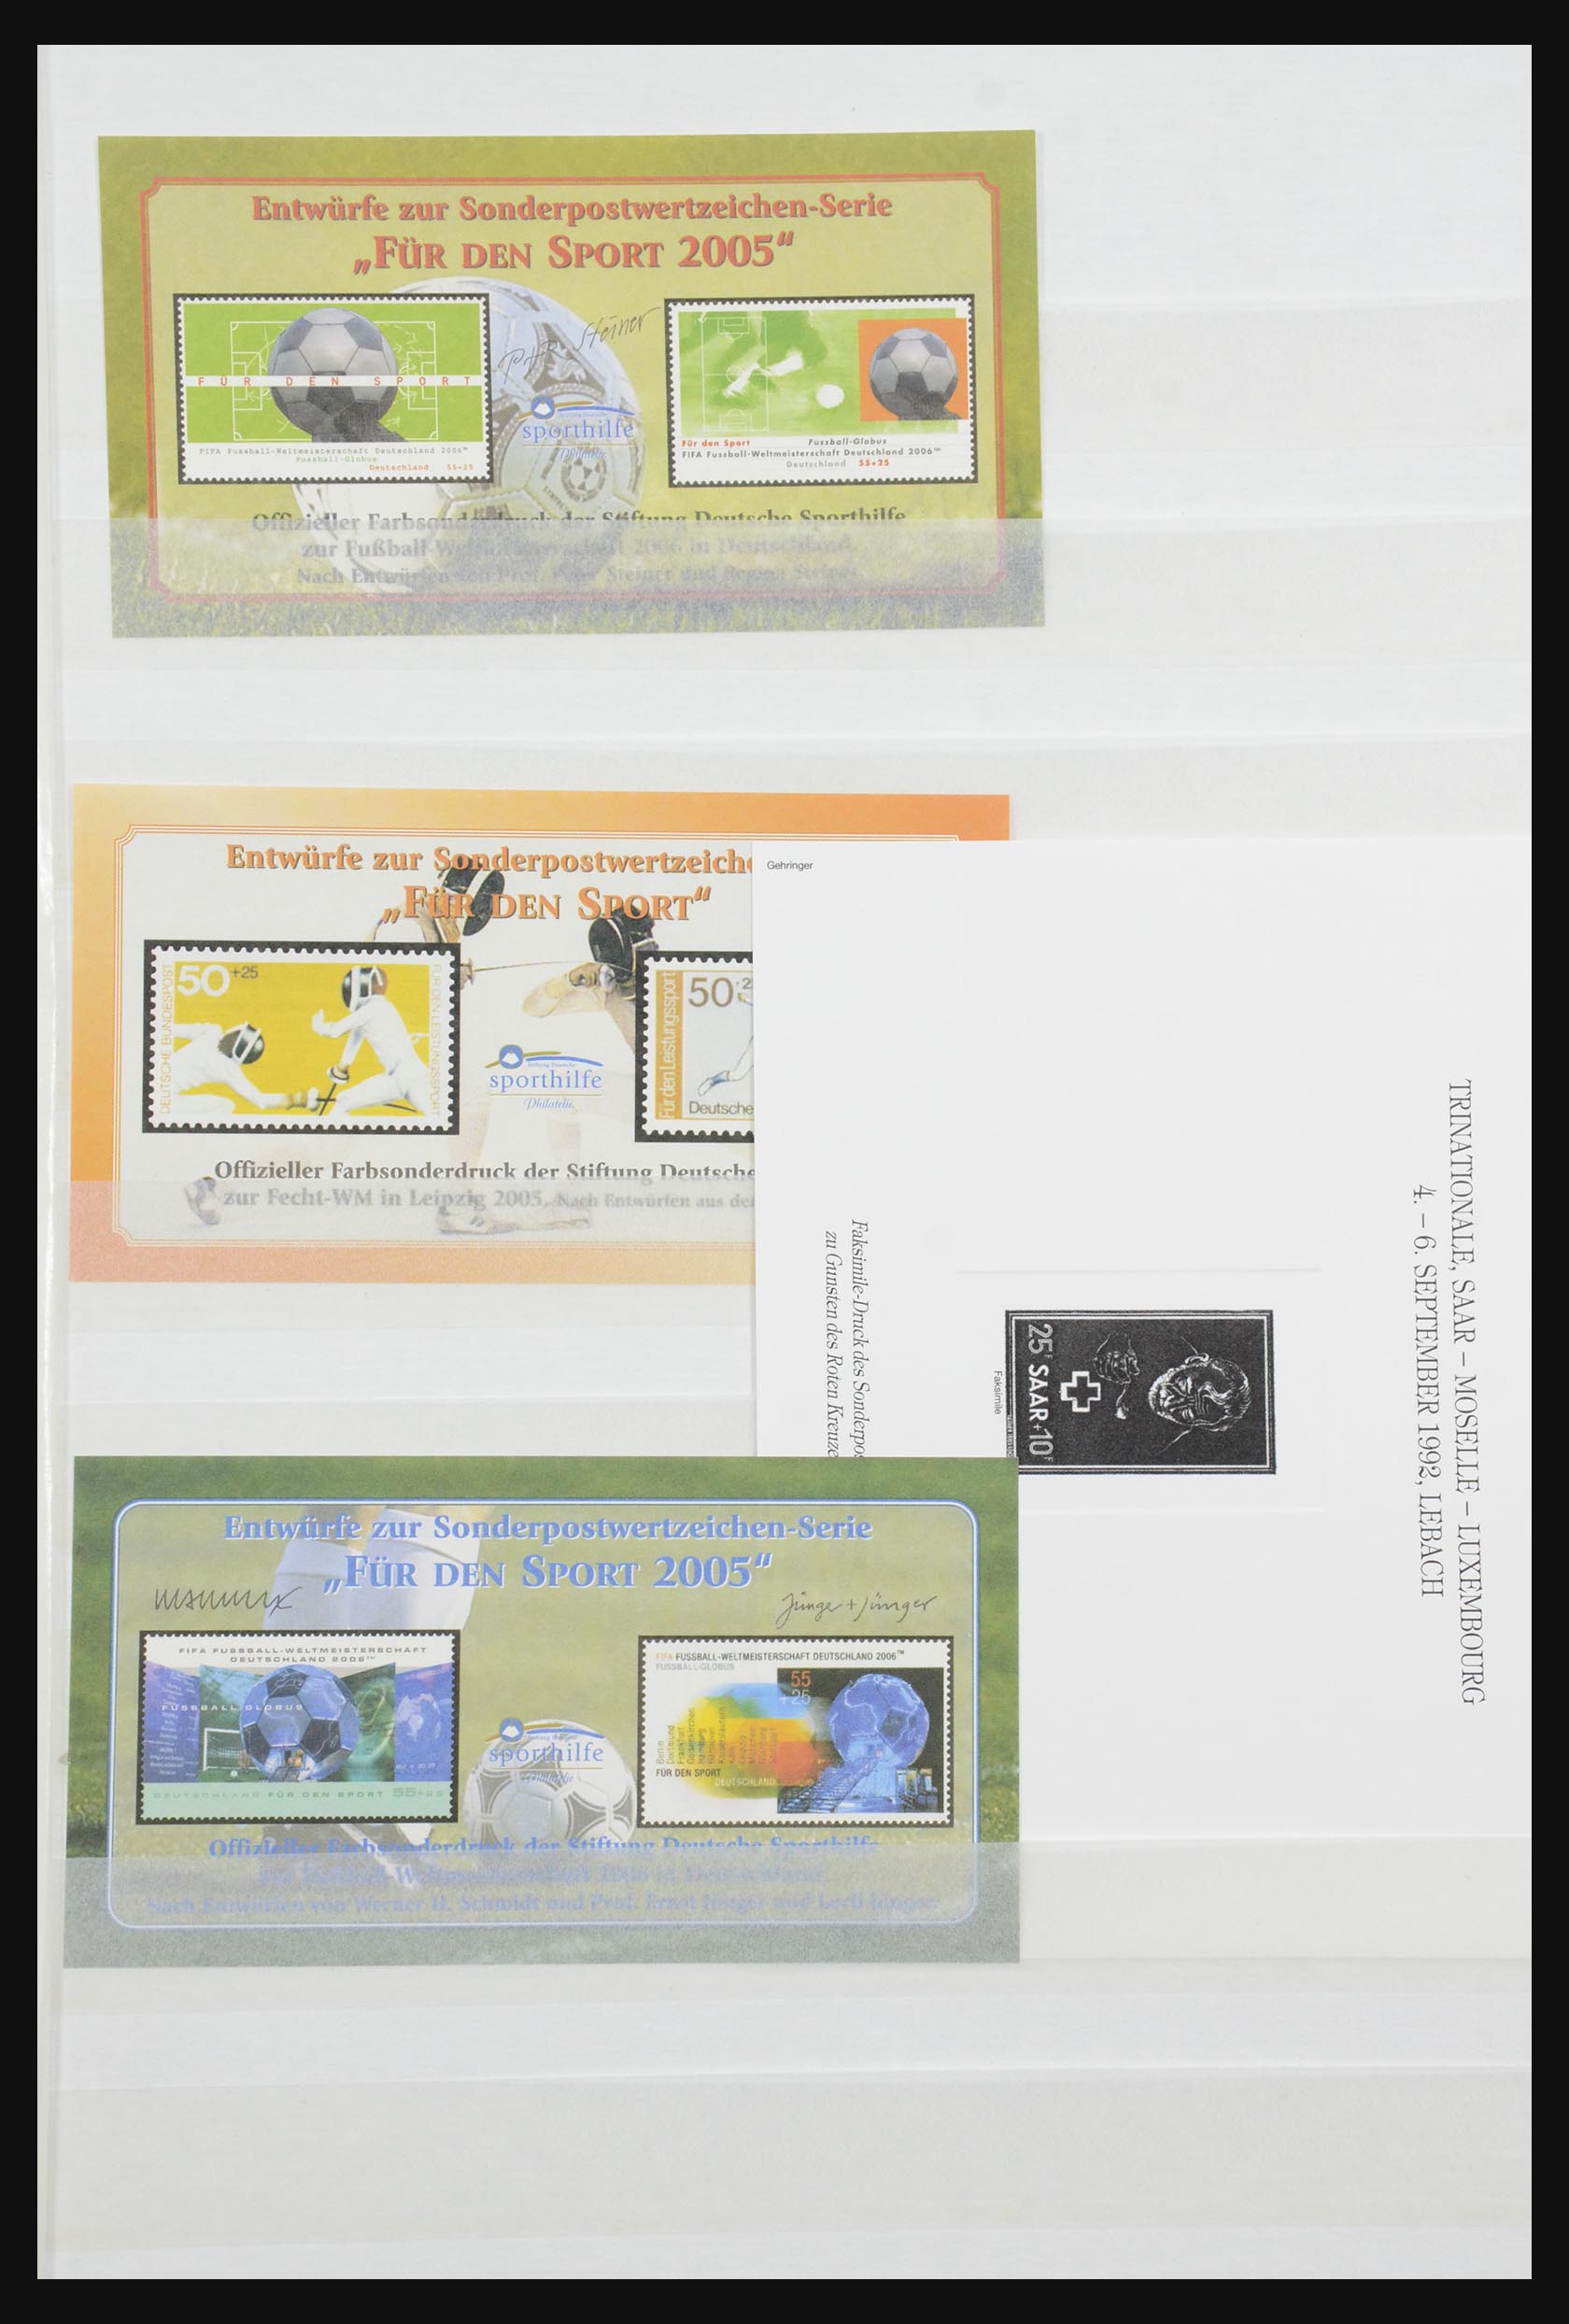 32050 025 - 32050 Bundespost special sheets 1980-2010.